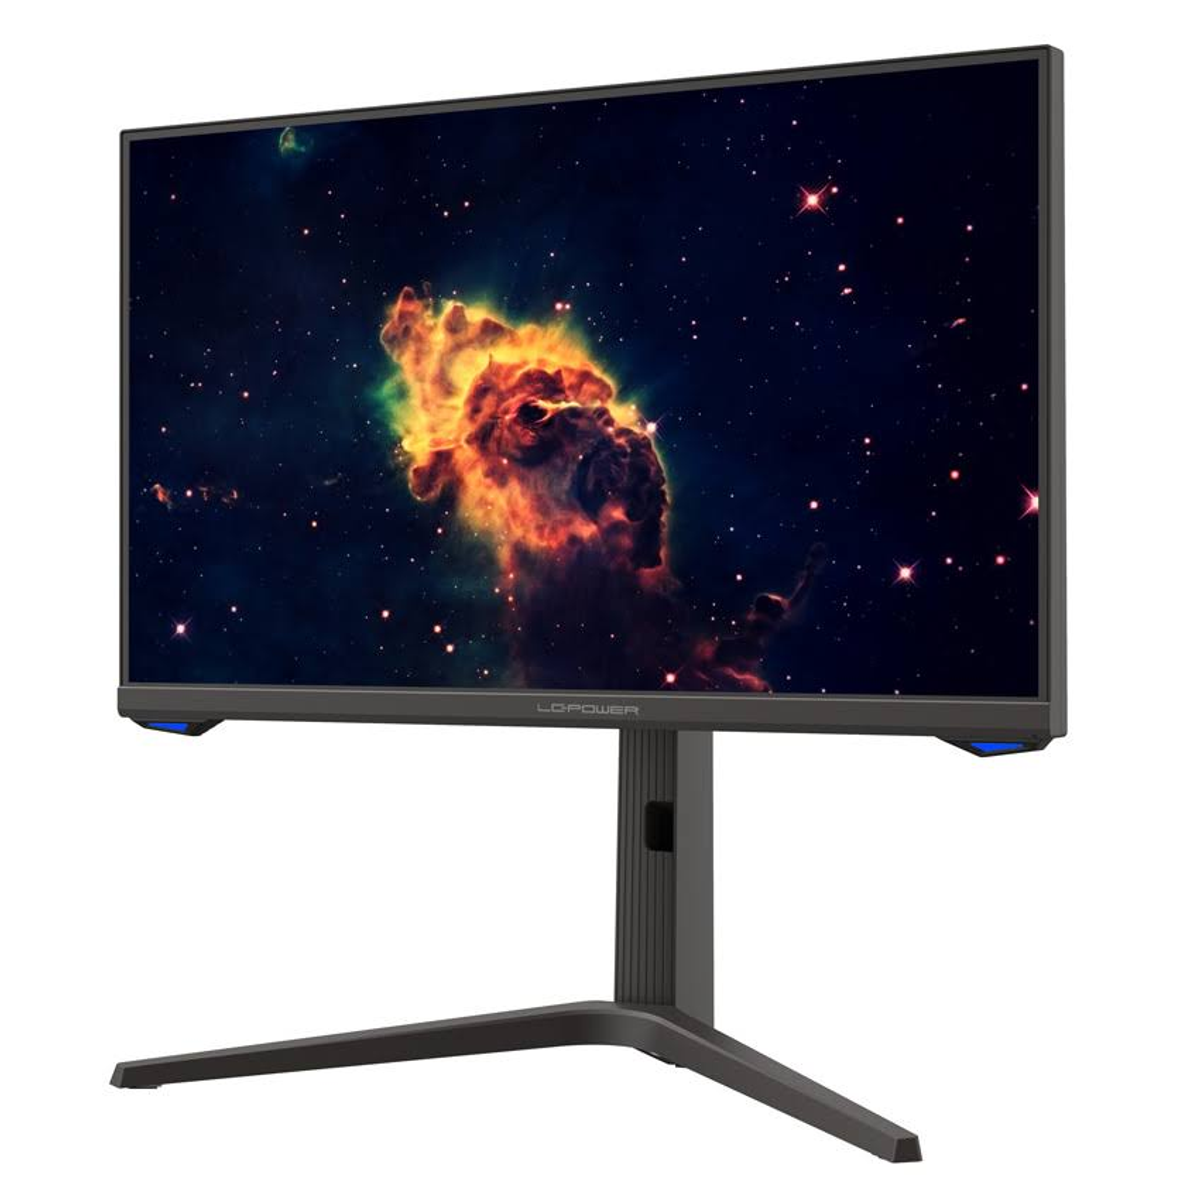 LC-M25-FHD-144 ms POWER LC (1 Hz nativ) Full-HD 25 144 , Zoll 144 Reaktionszeit Hz Monitor, , Gaming-Monitor